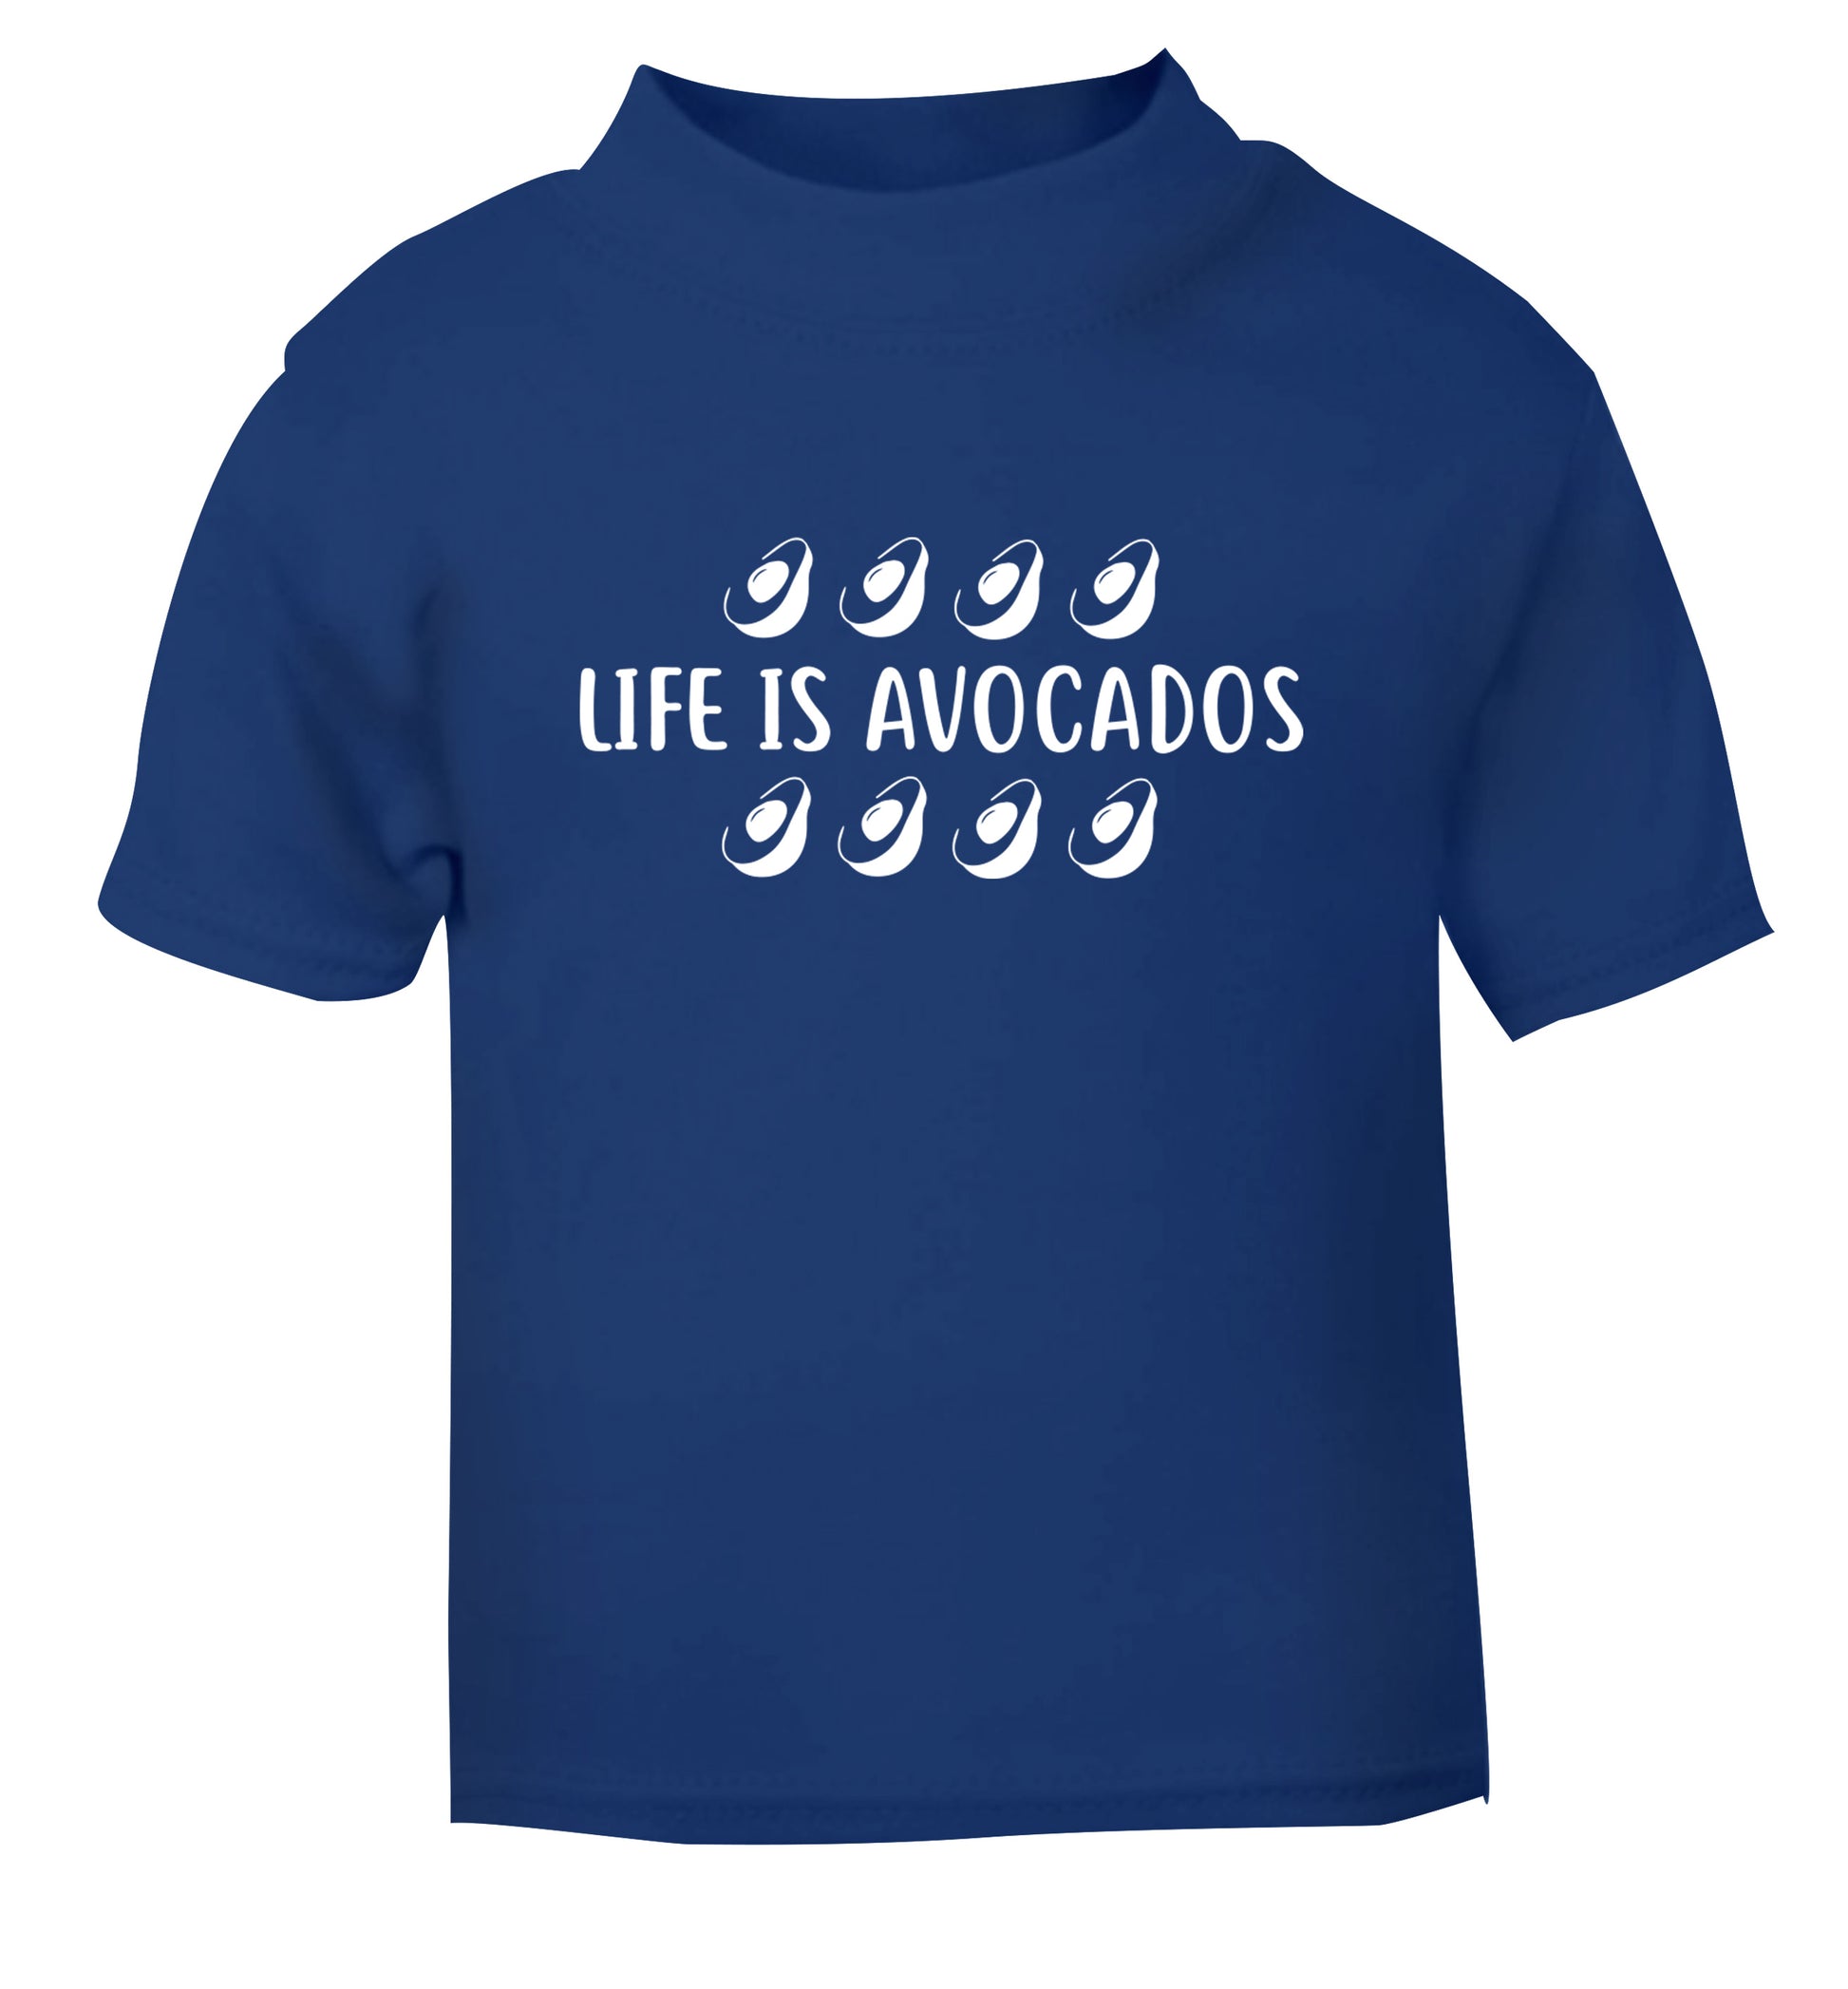 Life is avocados blue Baby Toddler Tshirt 2 Years